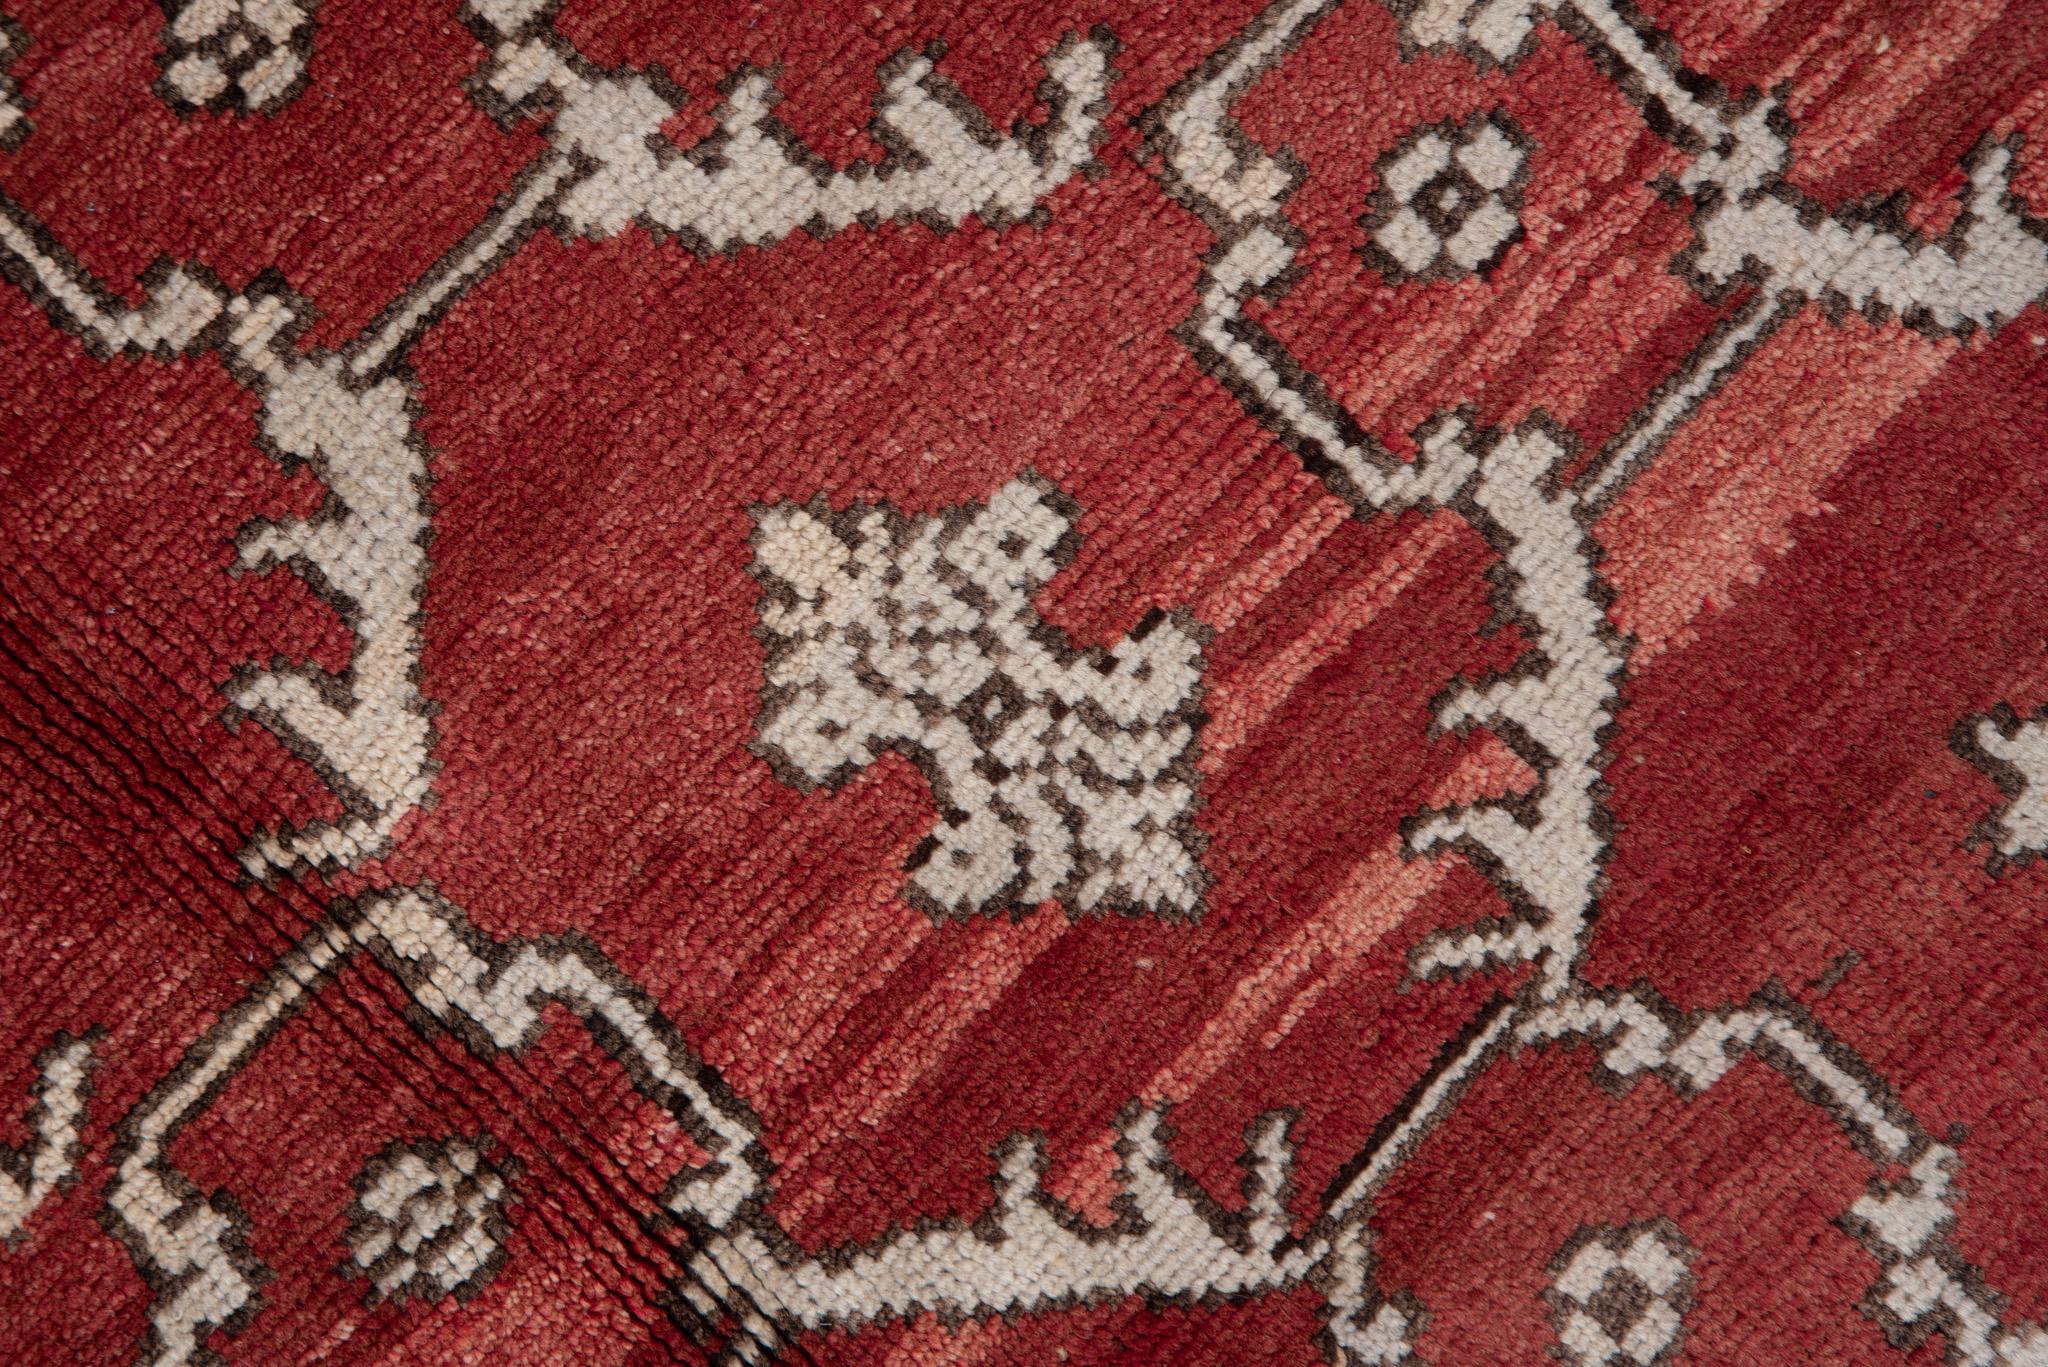 Eliko Rugs by David Ariel Vintage Oushak Rug, Red Allover Field, High Pile In Good Condition For Sale In New York, NY